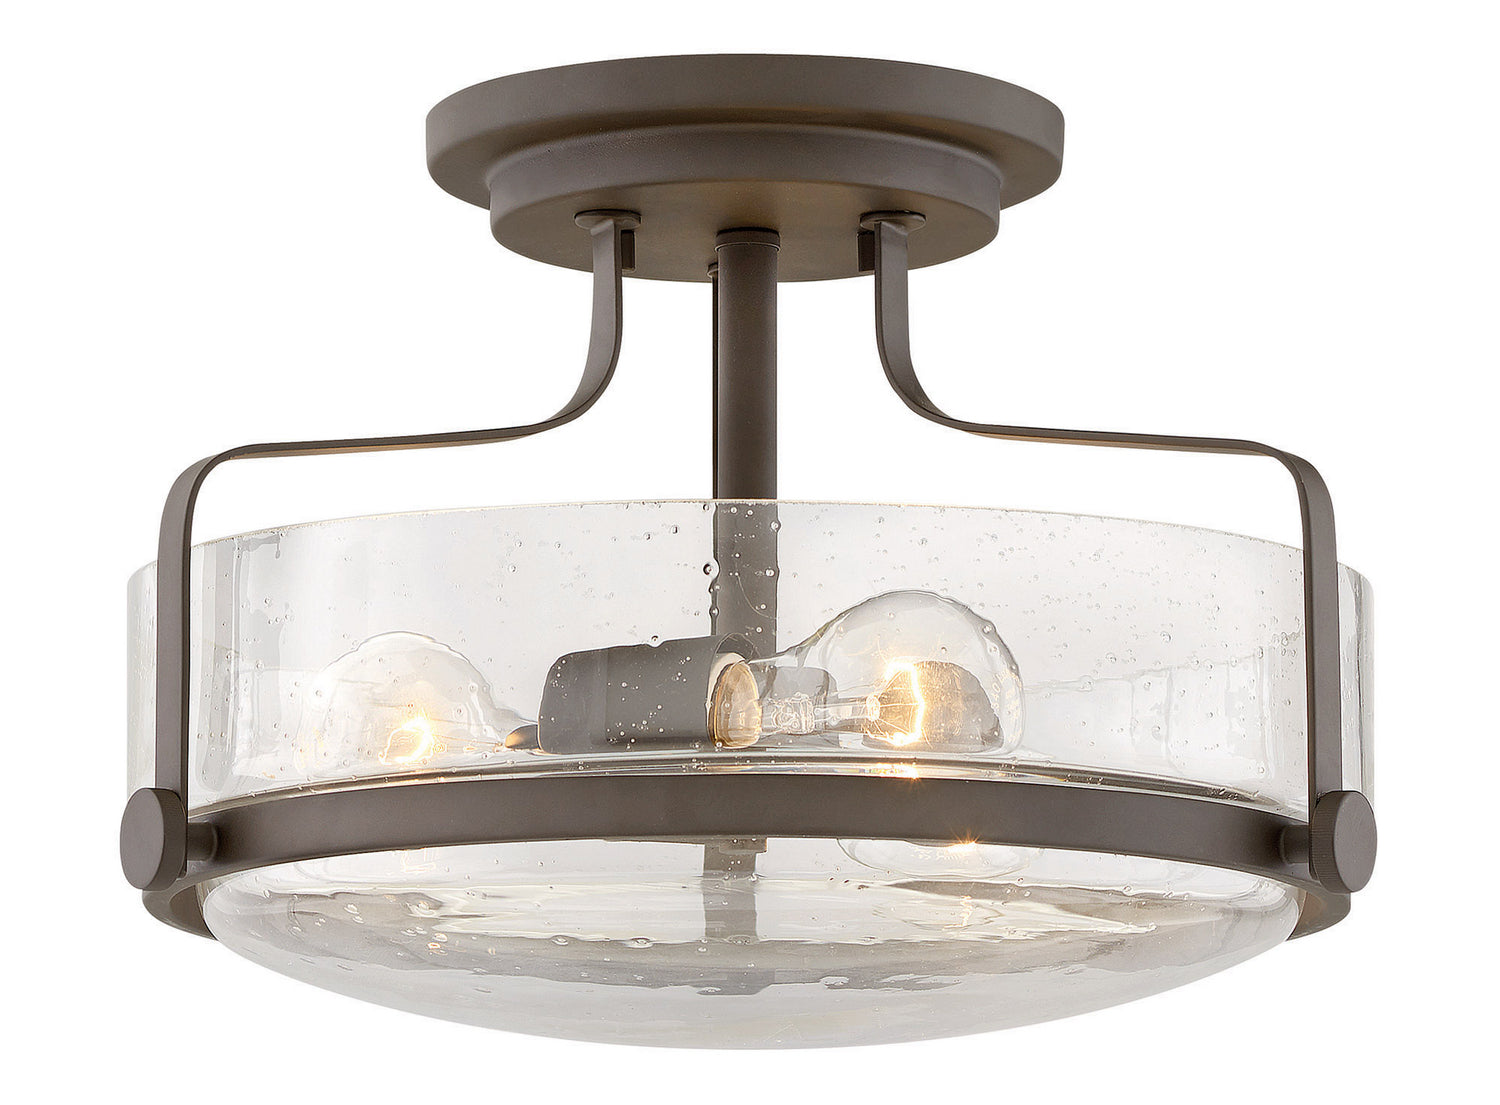 Hinkley Canada - LED Semi-Flush Mount - Harper - Oil Rubbed Bronze with Clear Seedy glass- Union Lighting Luminaires Decor